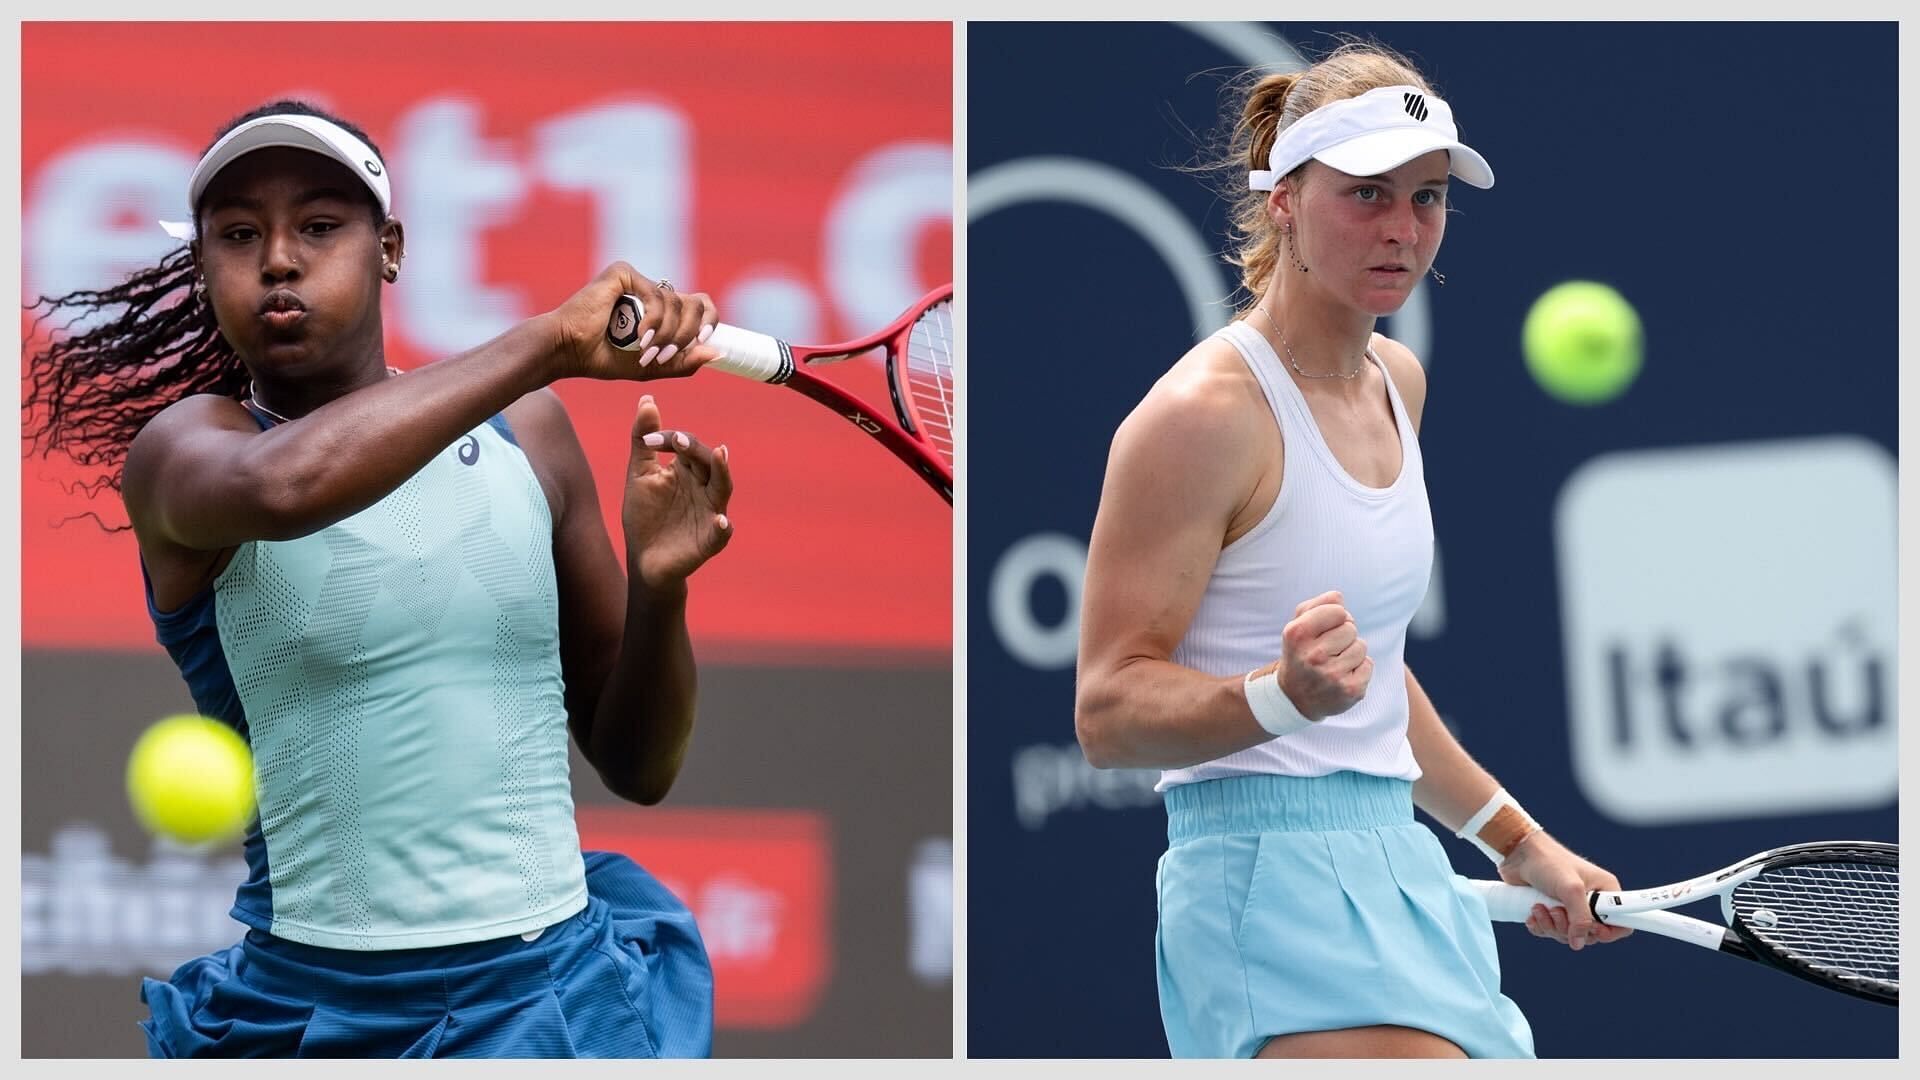 Alycia Parks vs Liudmila Samsonova is one of the first-round matches at the 2023 China Open.